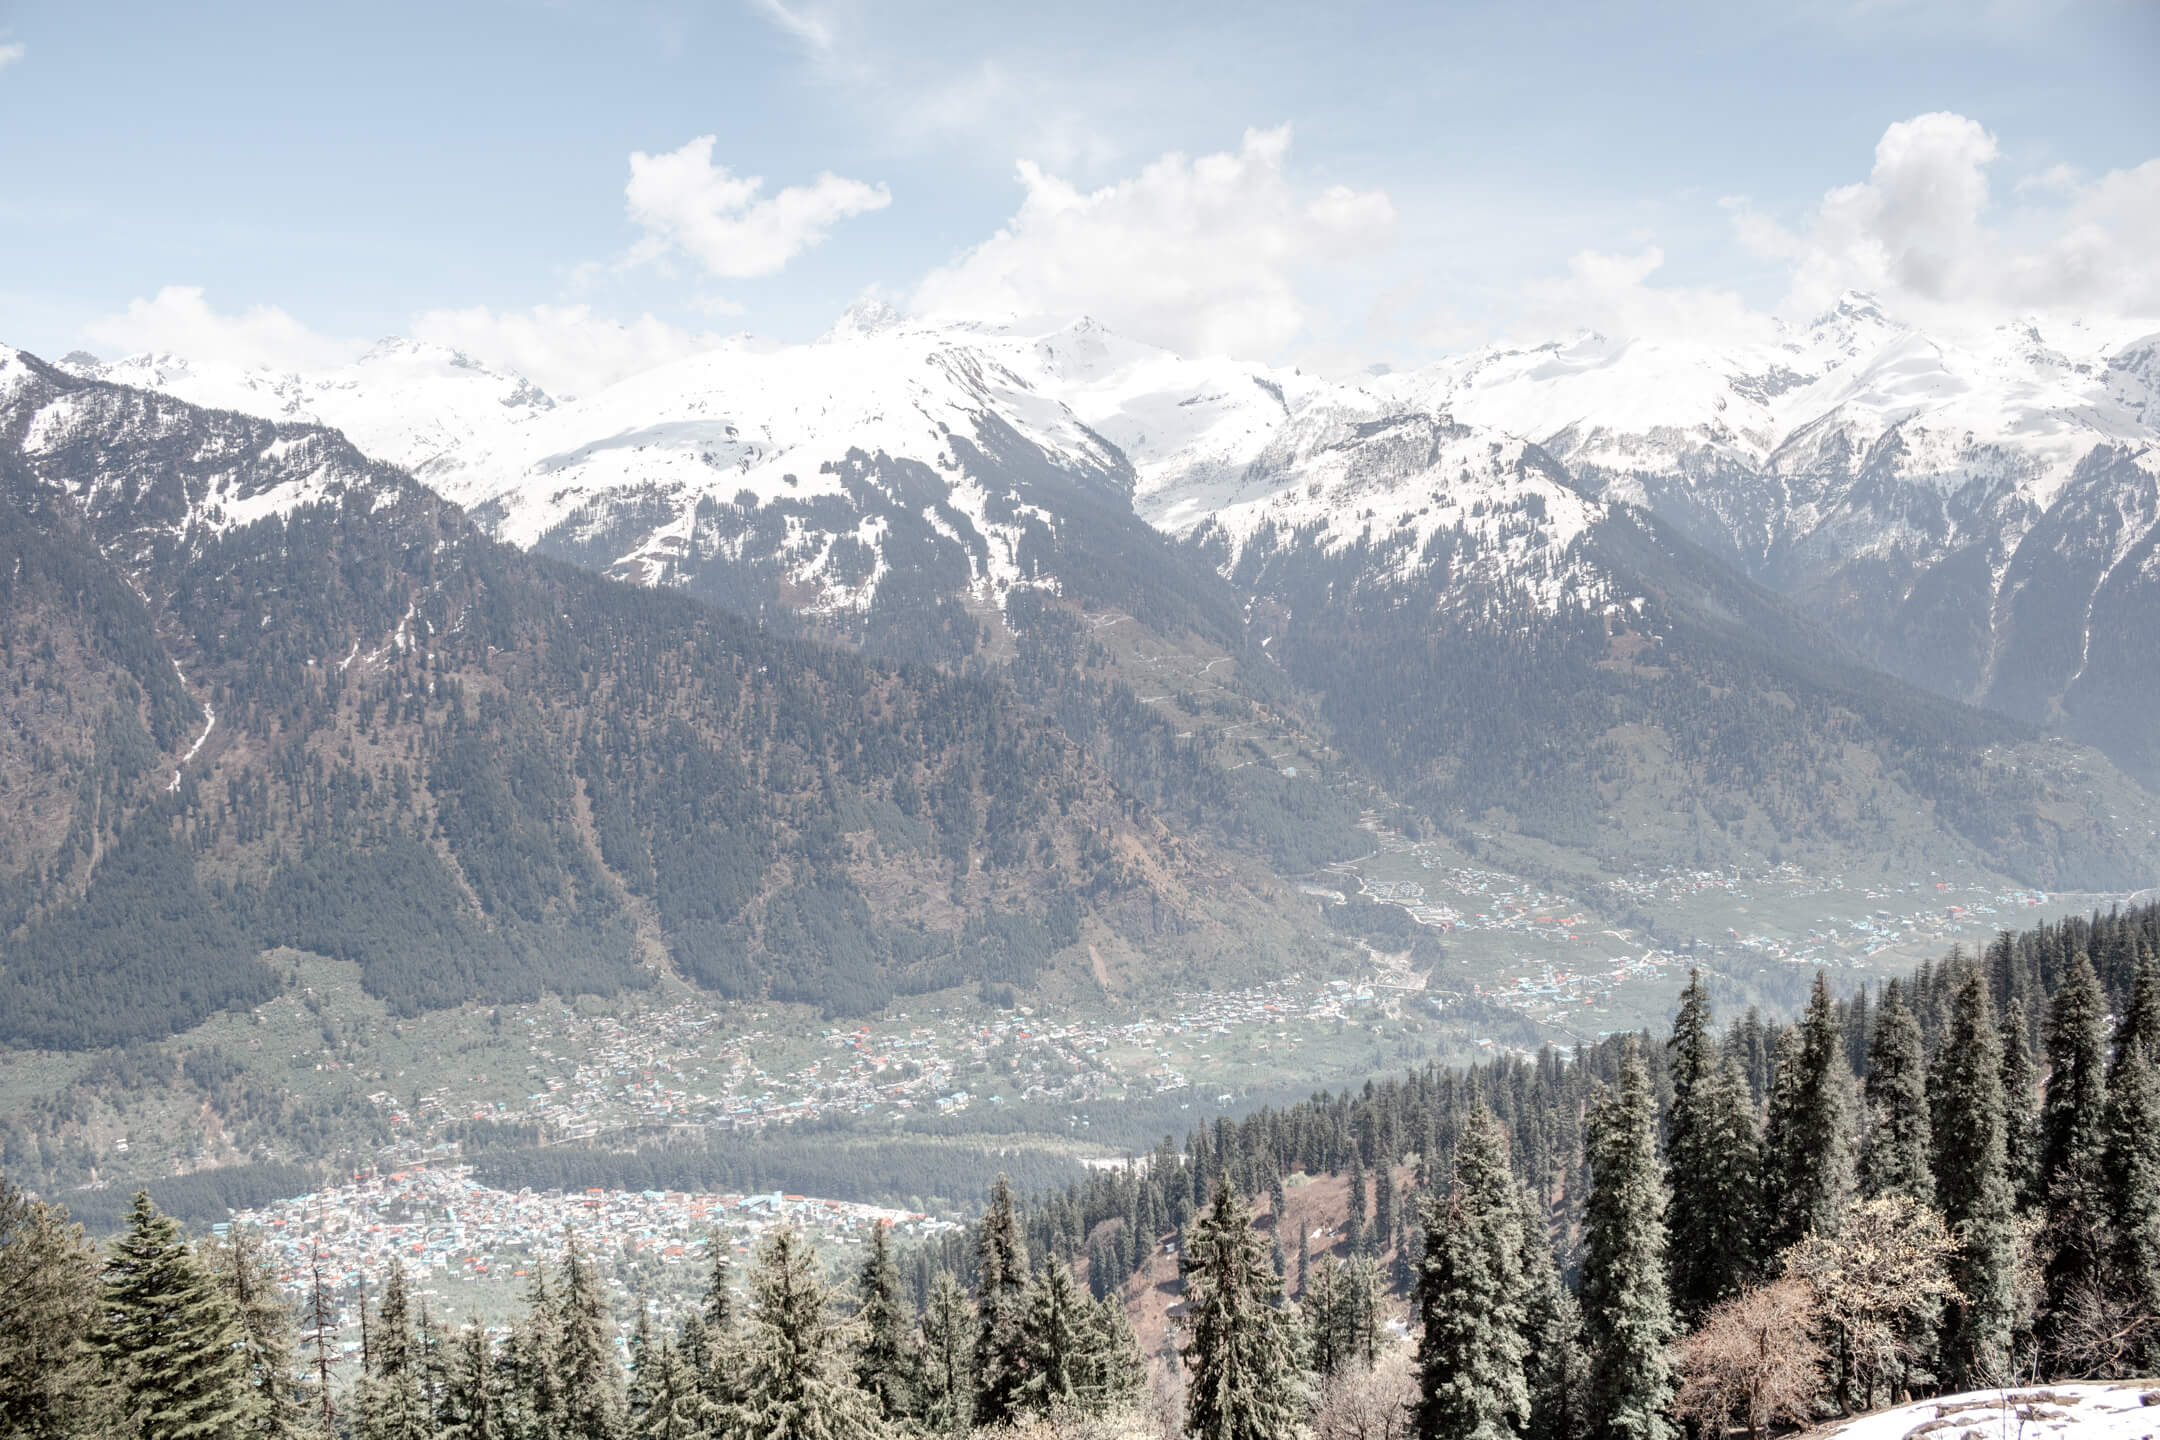 10 Photos That Will Make You Want To Visit Manali